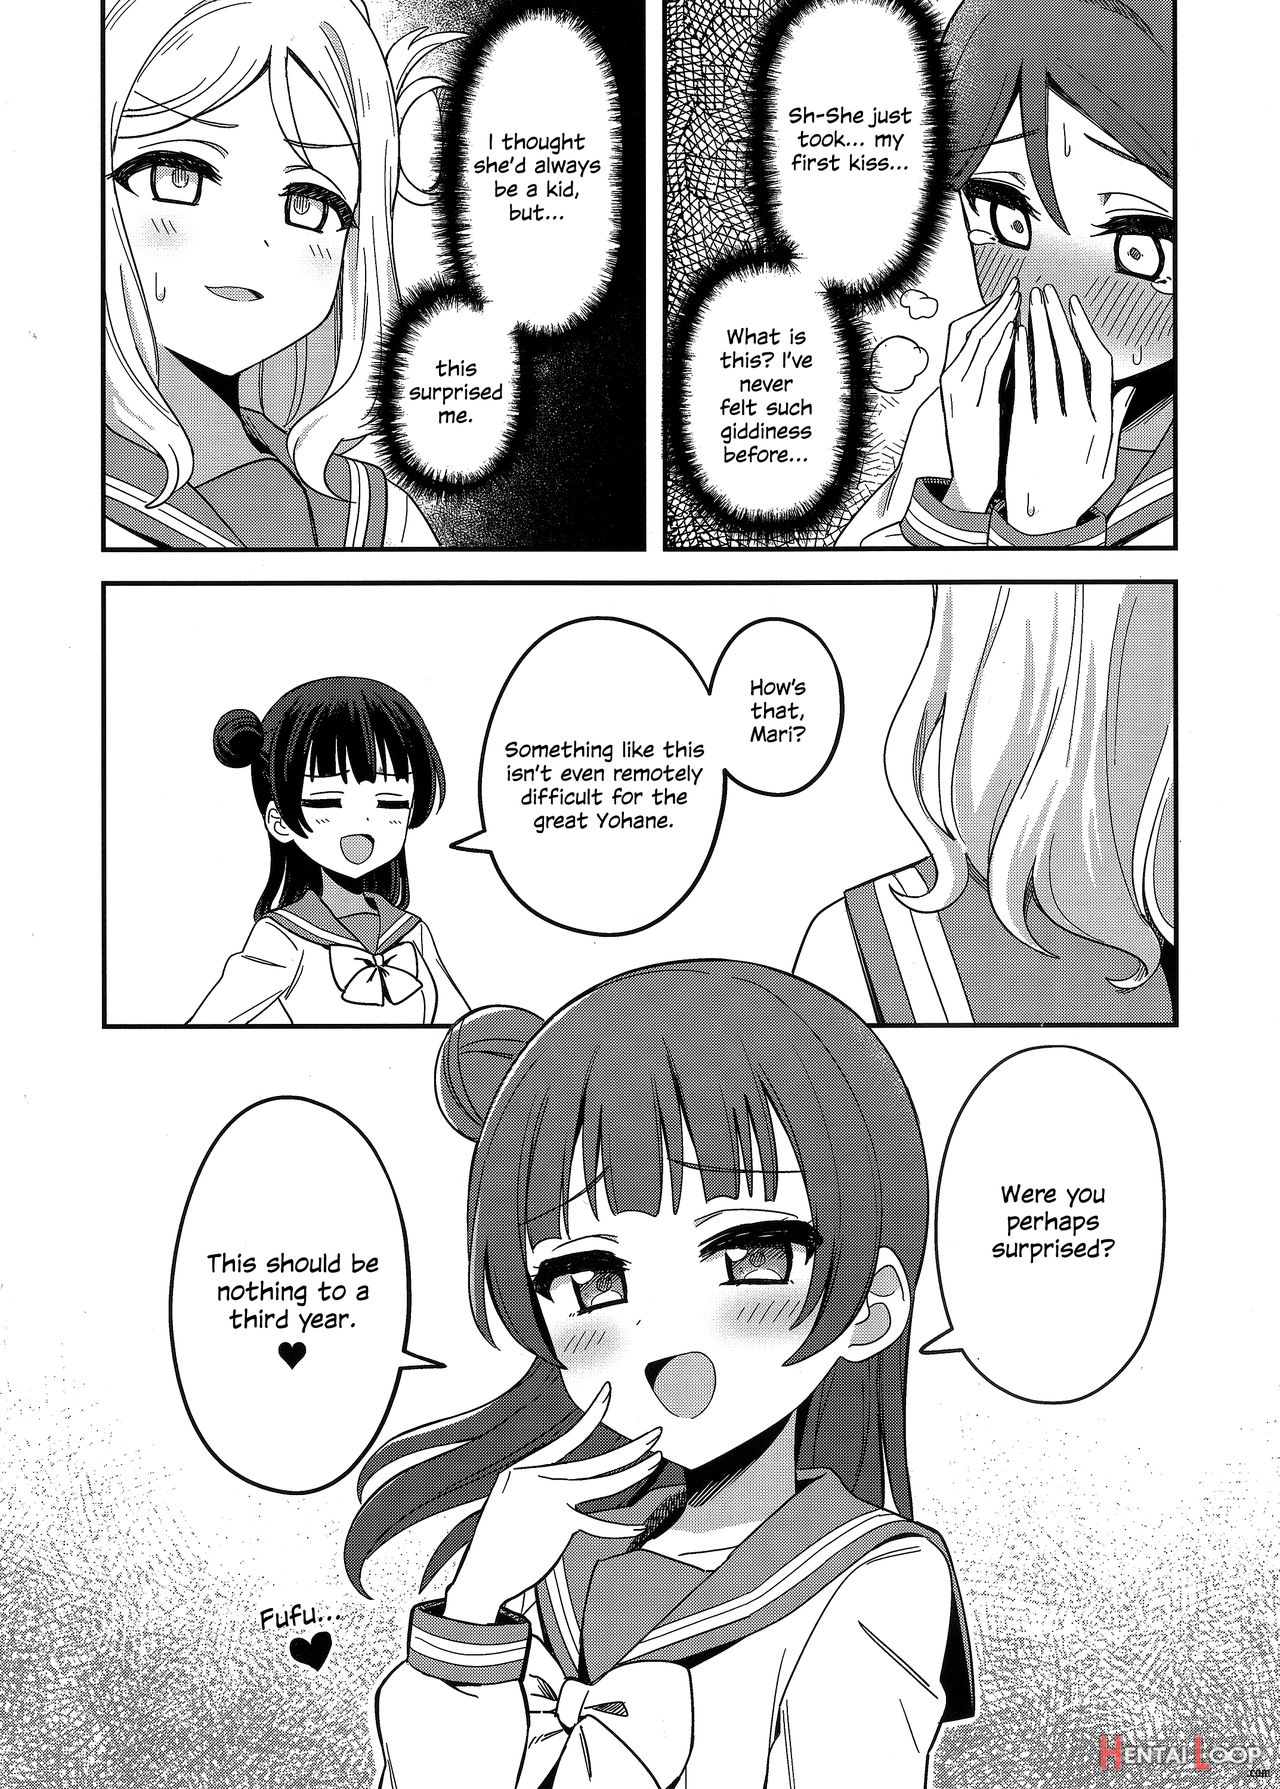 Fallen Angel-sama, Is This Guilty Too? page 5